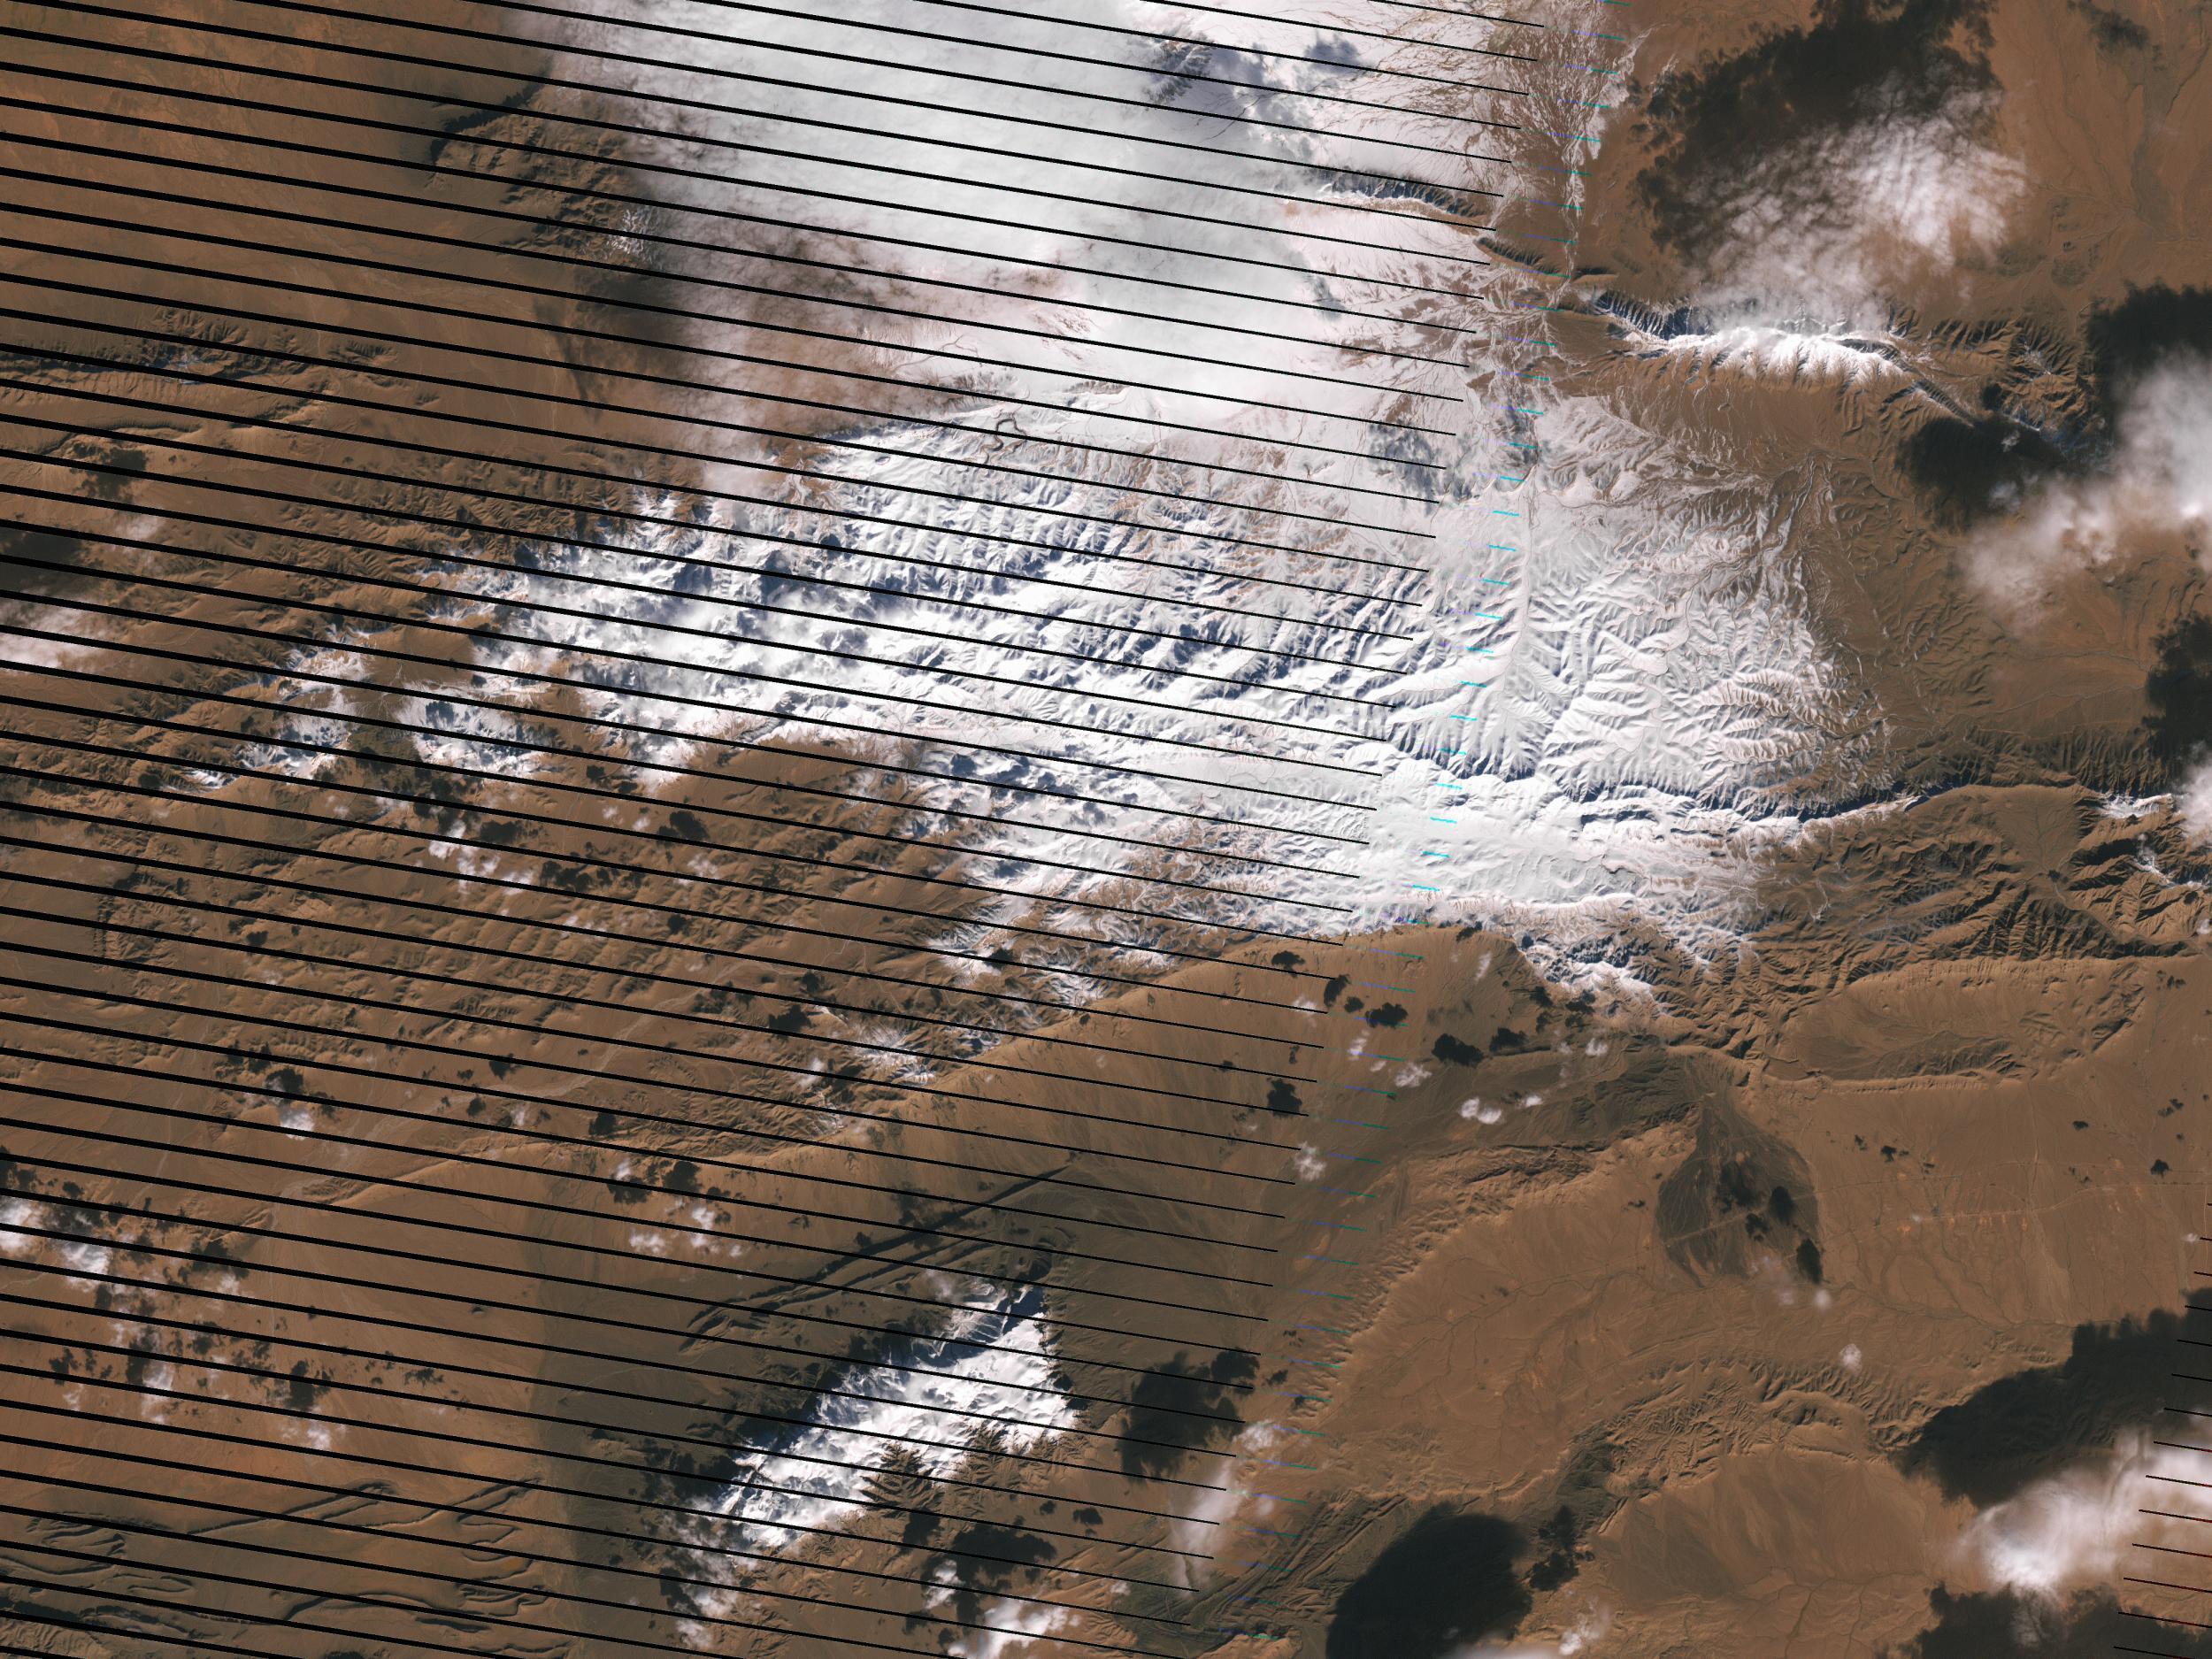 Snow in the Moroccan desert was clearly visible from space